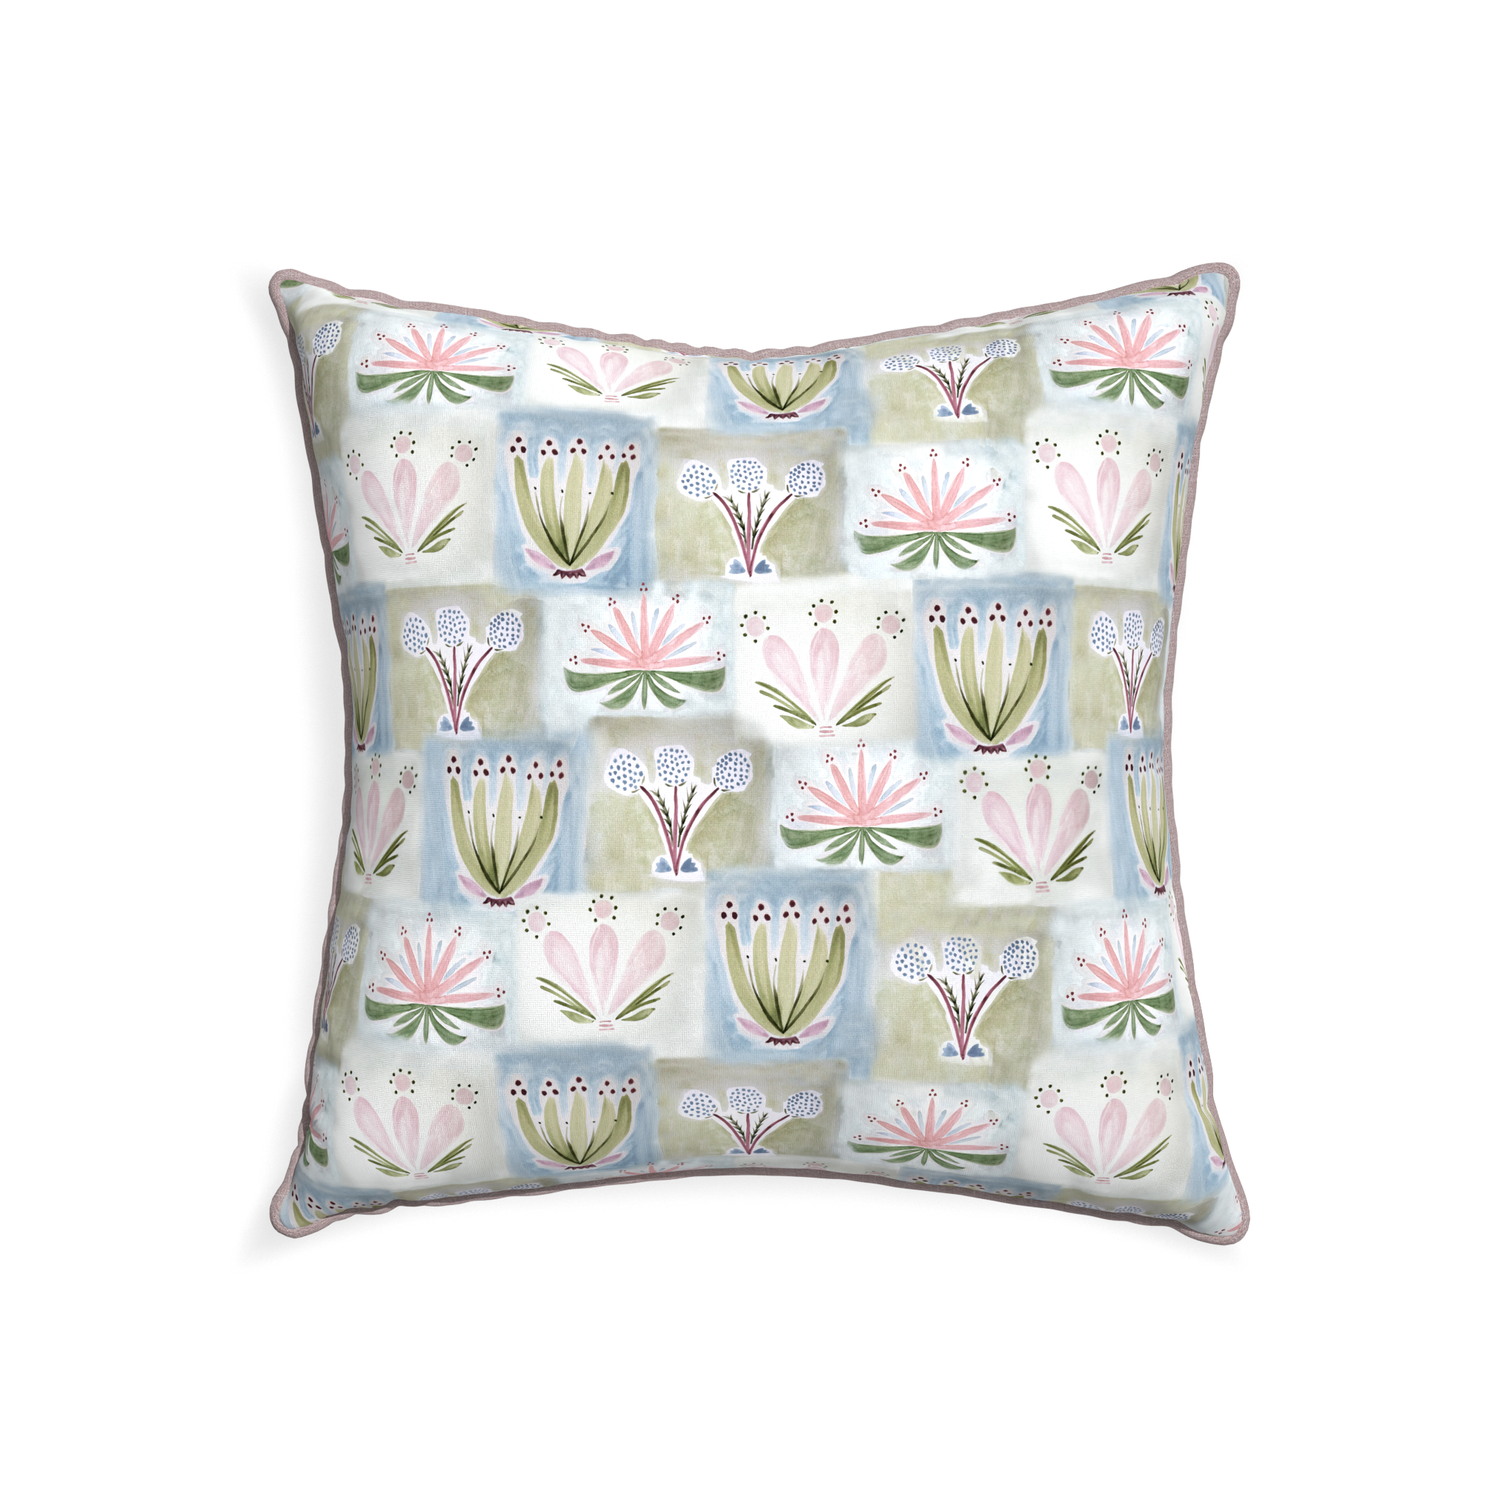 22-square harper custom hand-painted floralpillow with orchid piping on white background